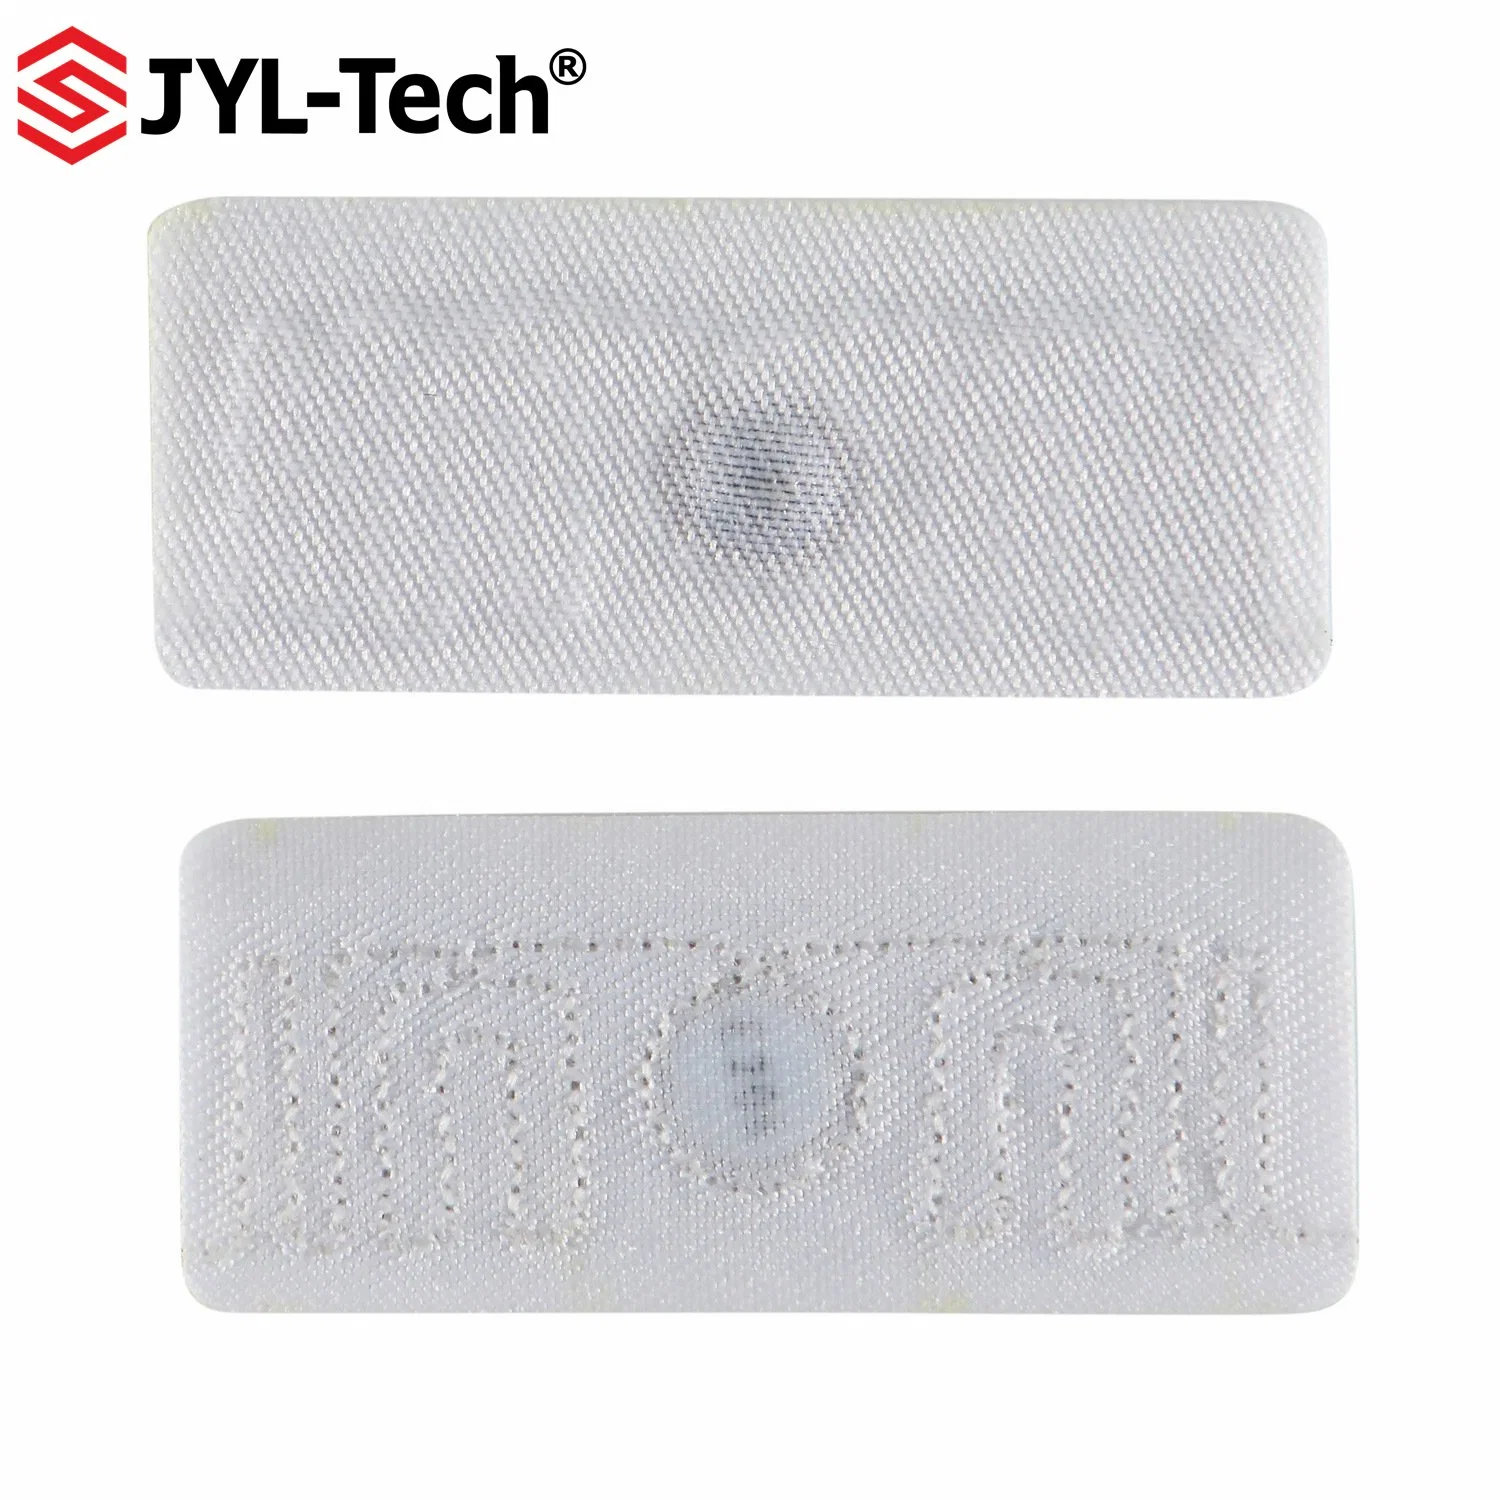 EPC Class1 Gen2 Waterproof Fabric Textile Linen RFID UHF Laundry Tag